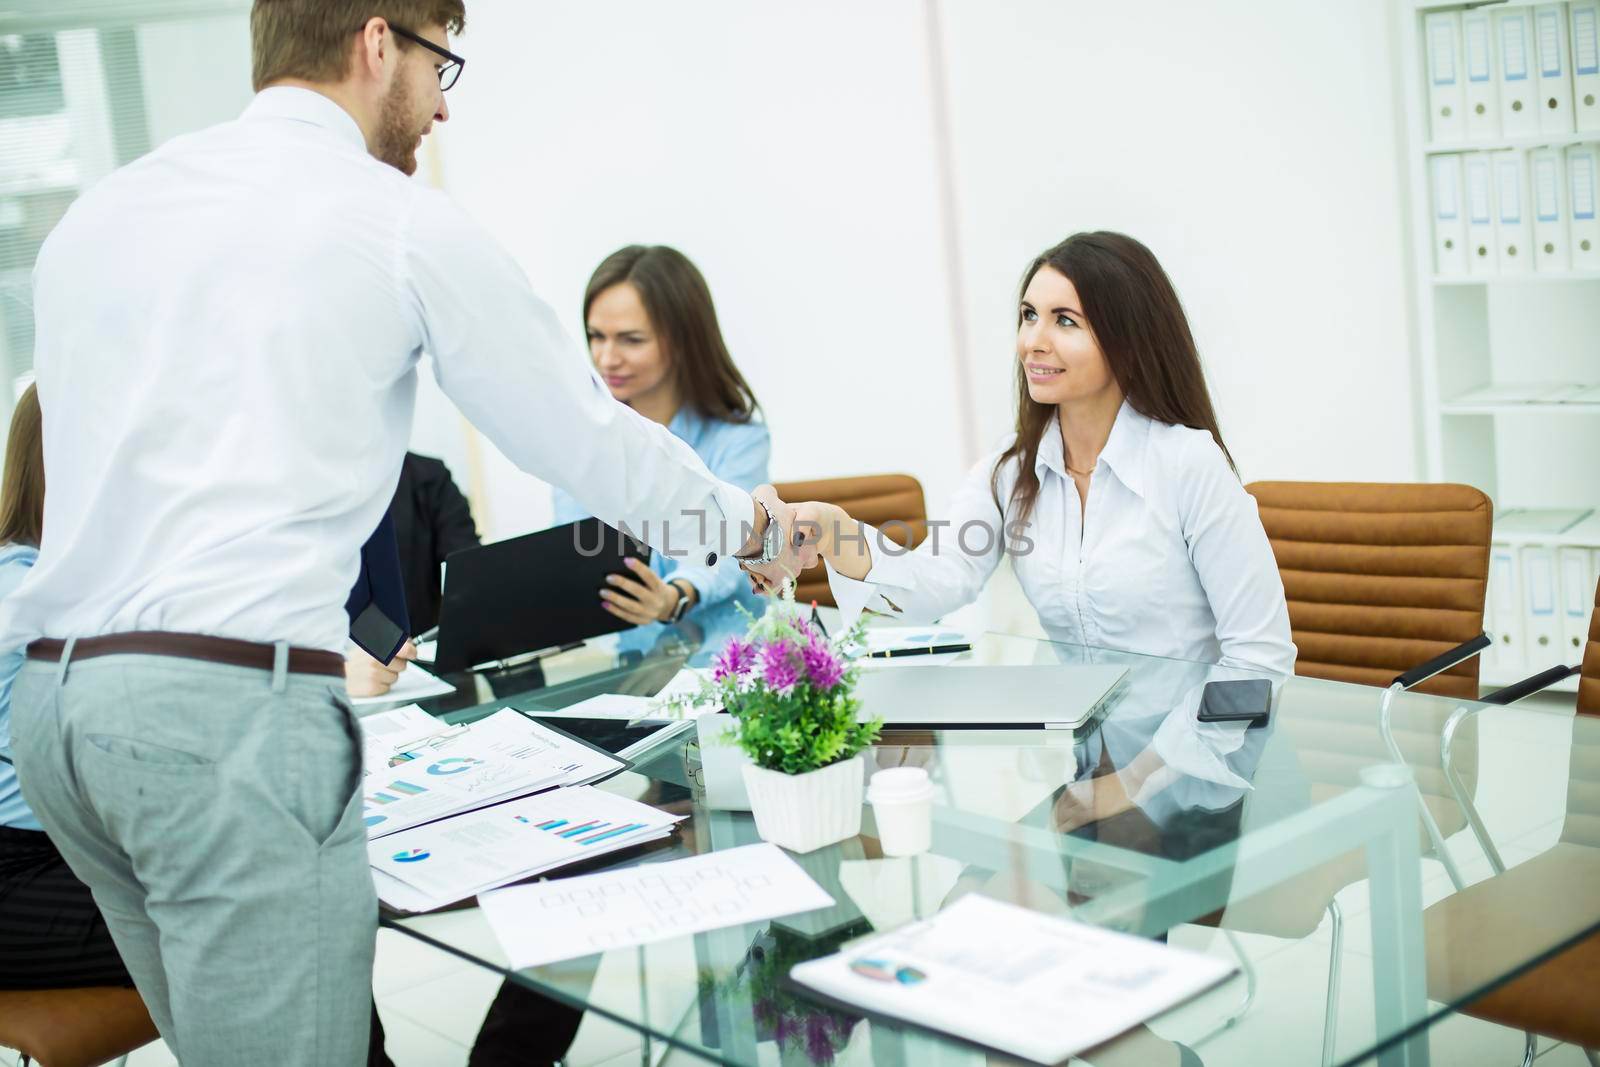 handshake with a senior Manager and a client at a business meeting in a modern office